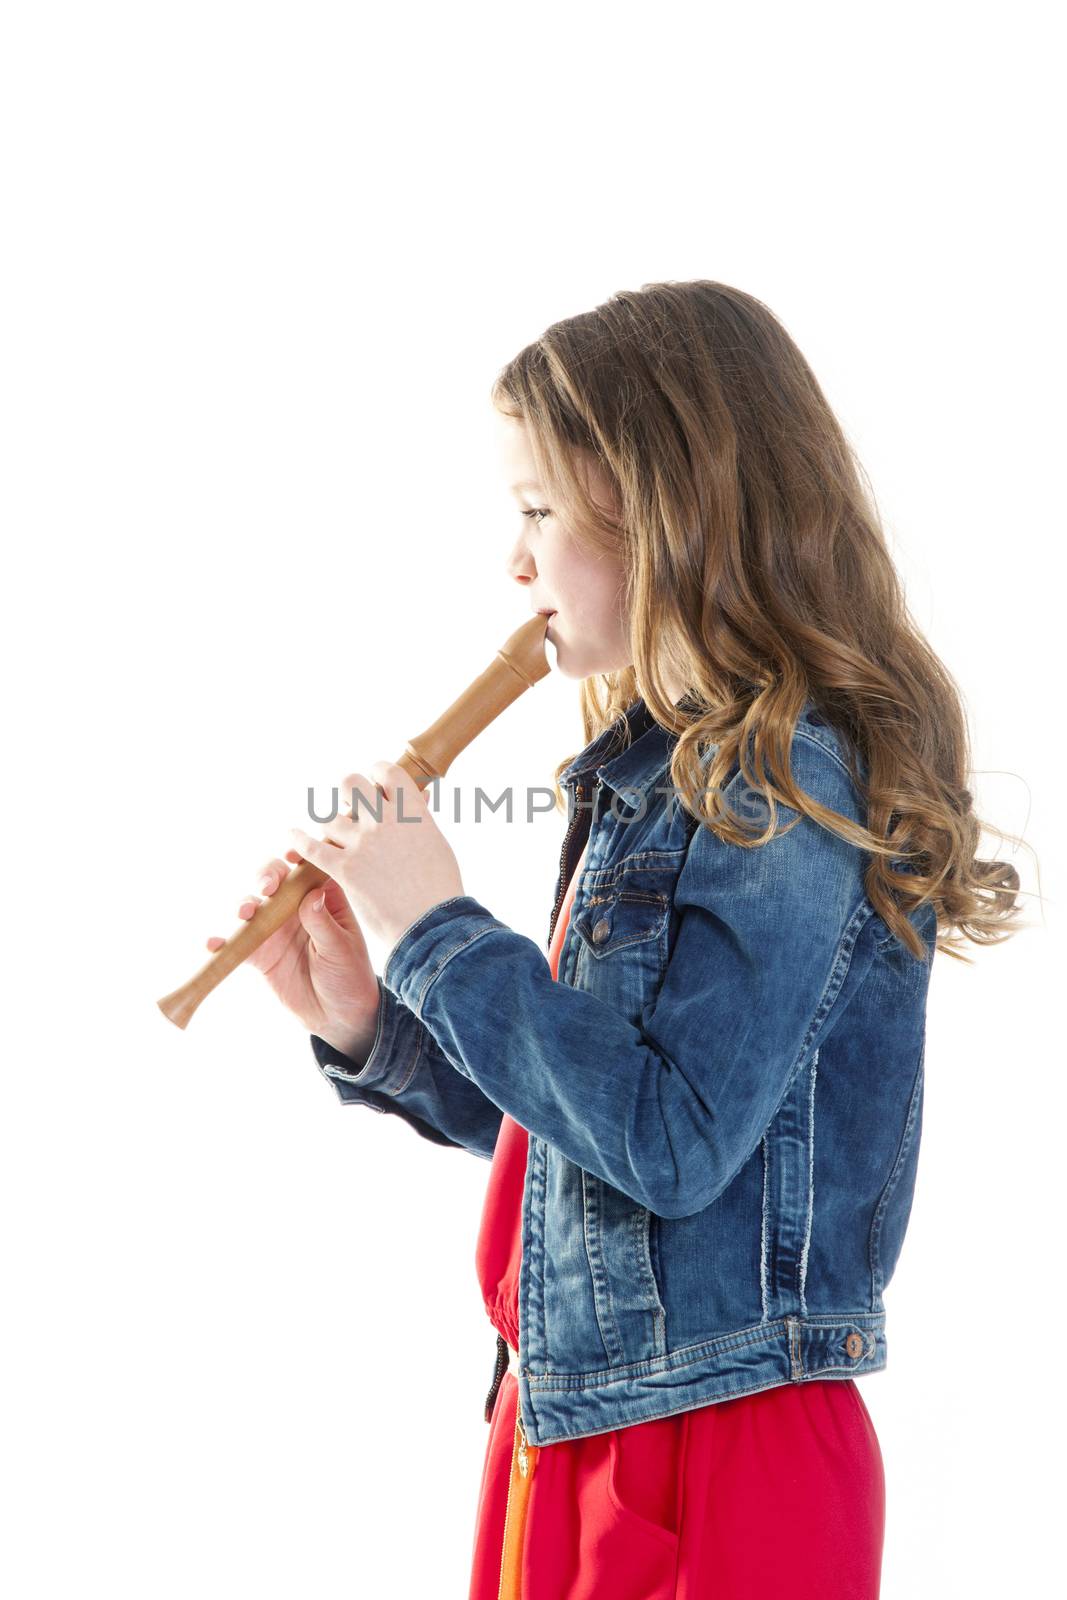 young girl with soprano recorder and white background